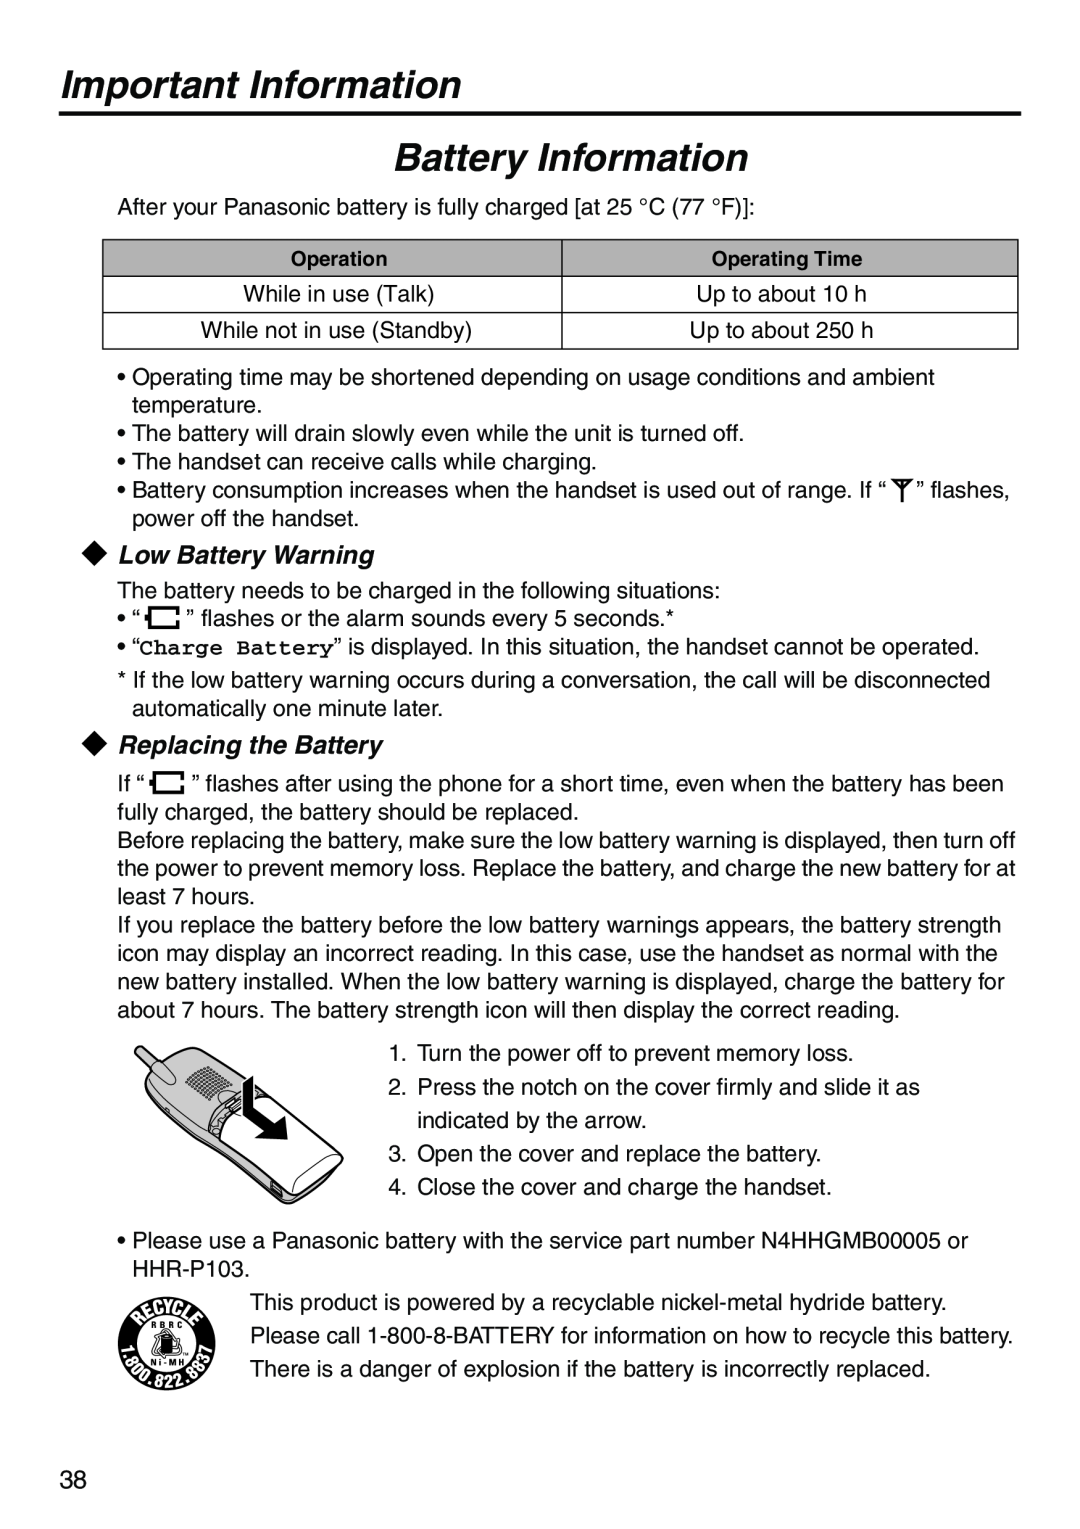 Panasonic KX-TDA100 manual Important Information, Battery Information, Low Battery Warning, Replacing the Battery 